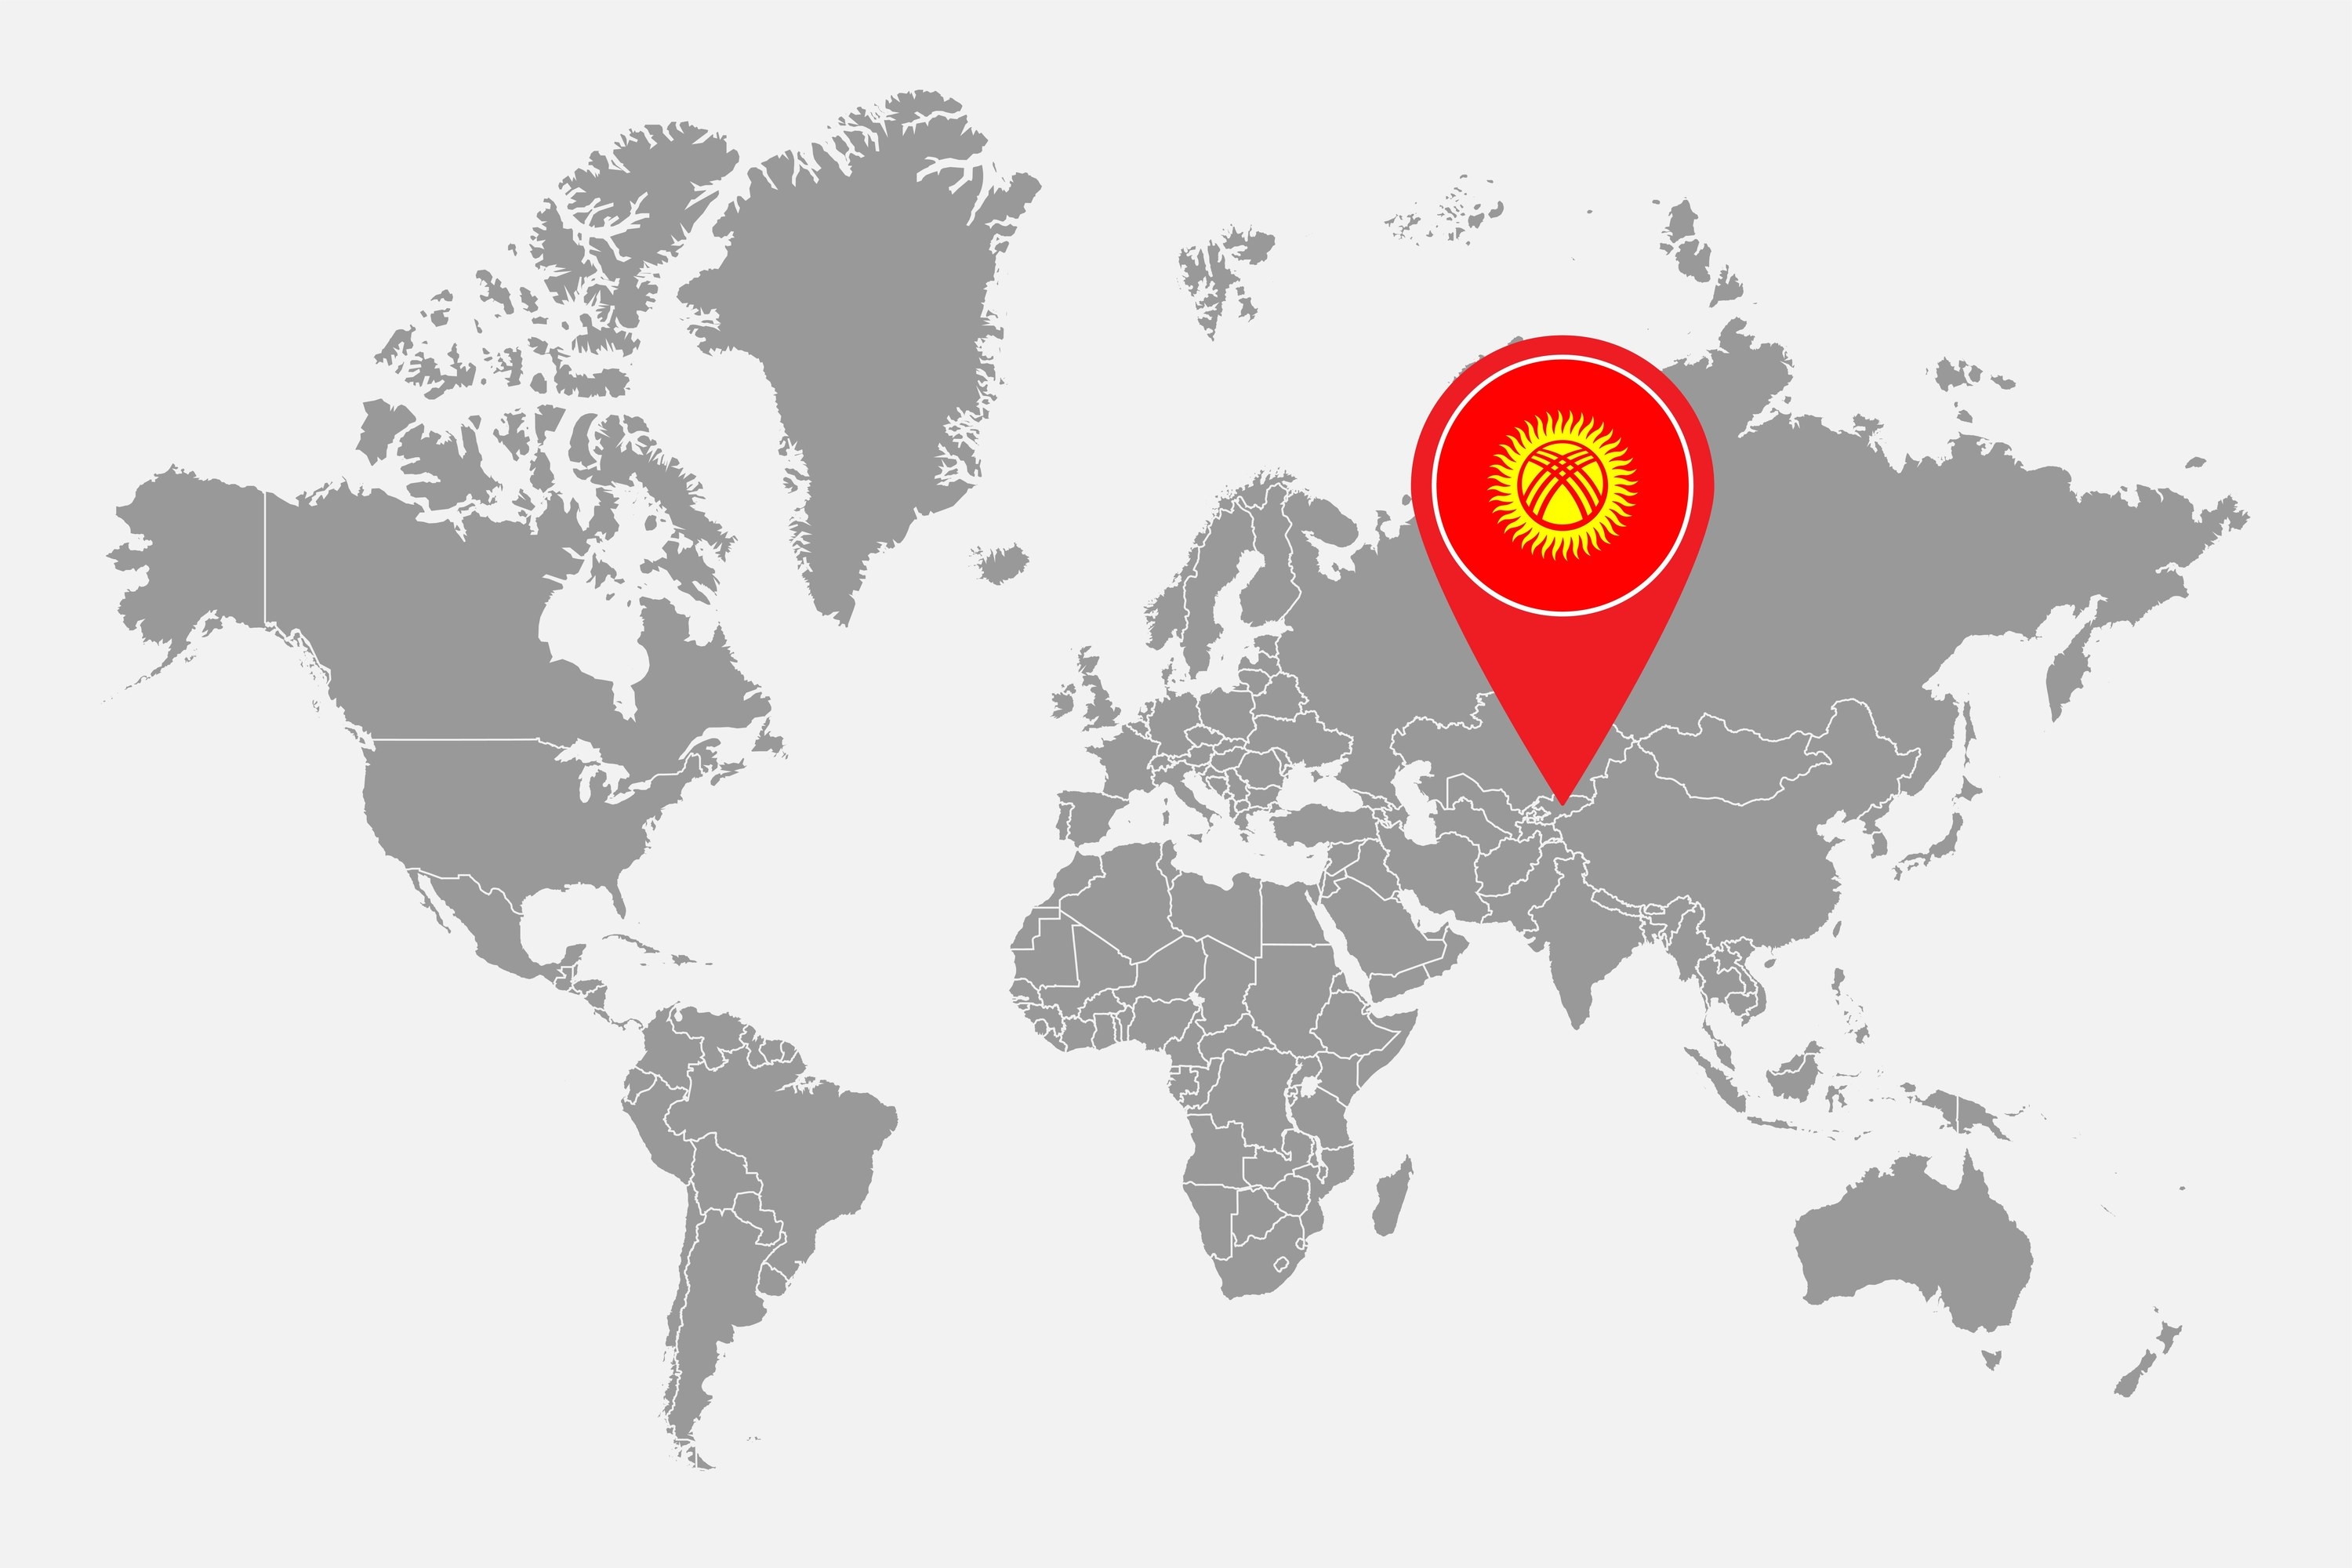 A world map with Kyrgyzstan indicated